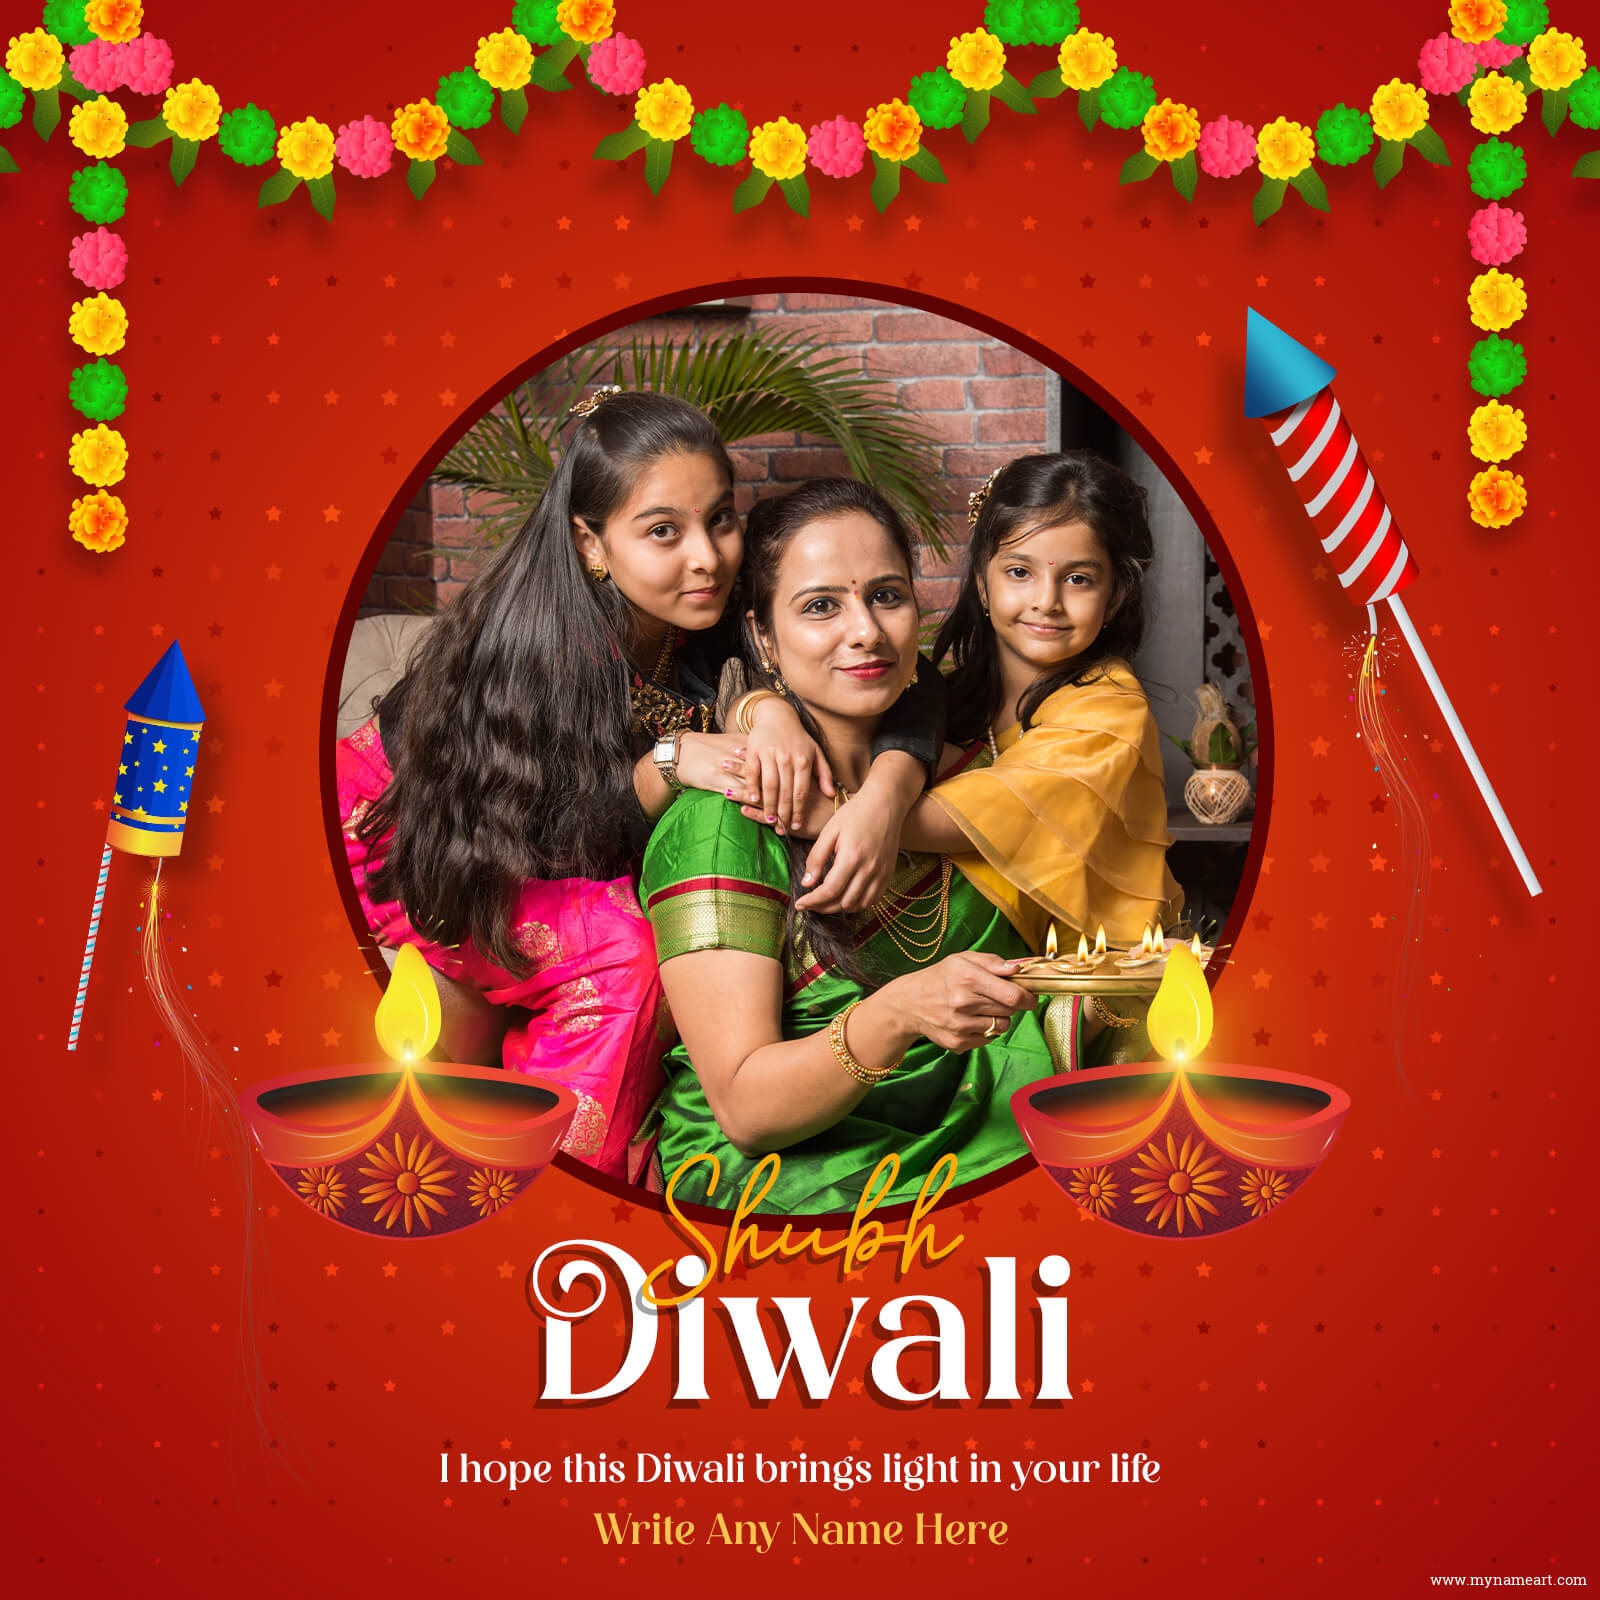 Impressive Diwali Greetings Cards With Photo And Name.